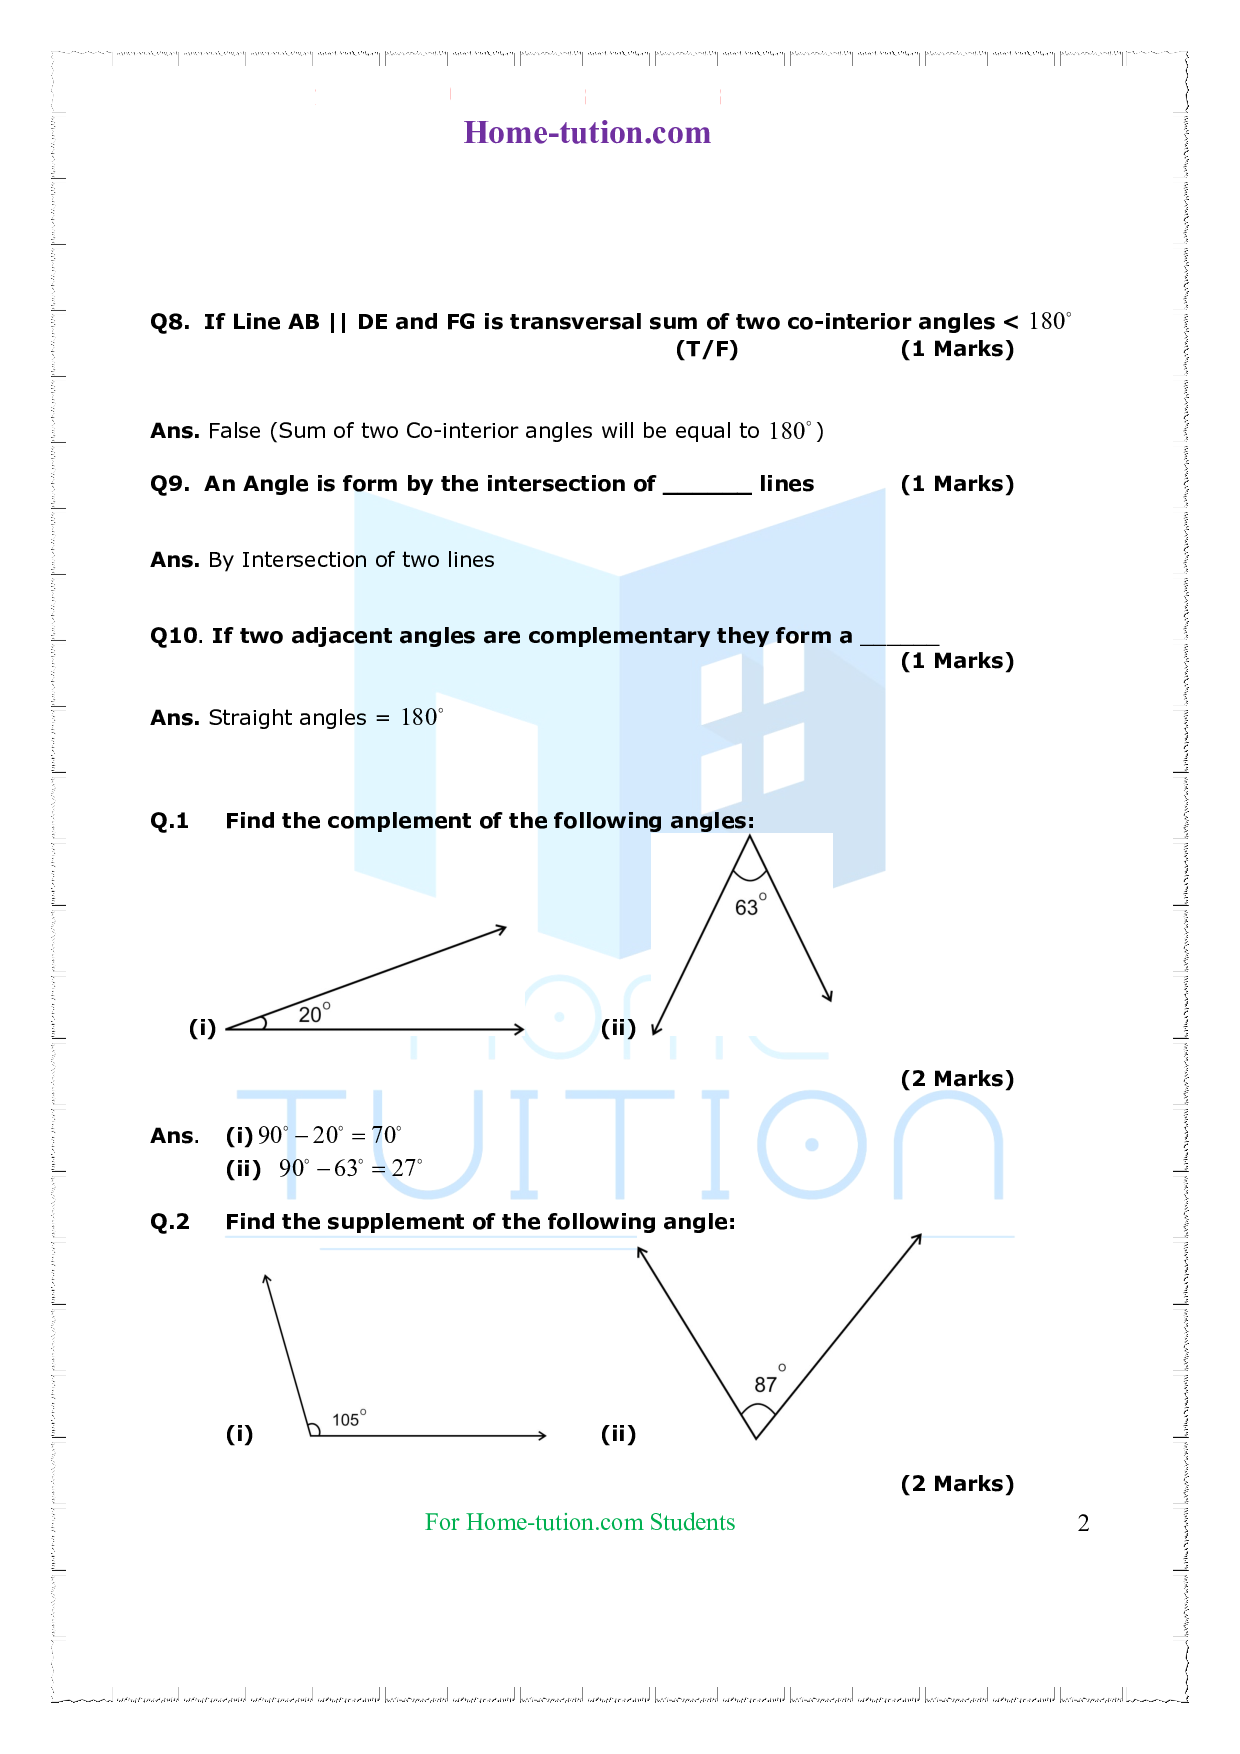 Extra Questions on Class 7 Maths Chapter 5 Lines and Angles